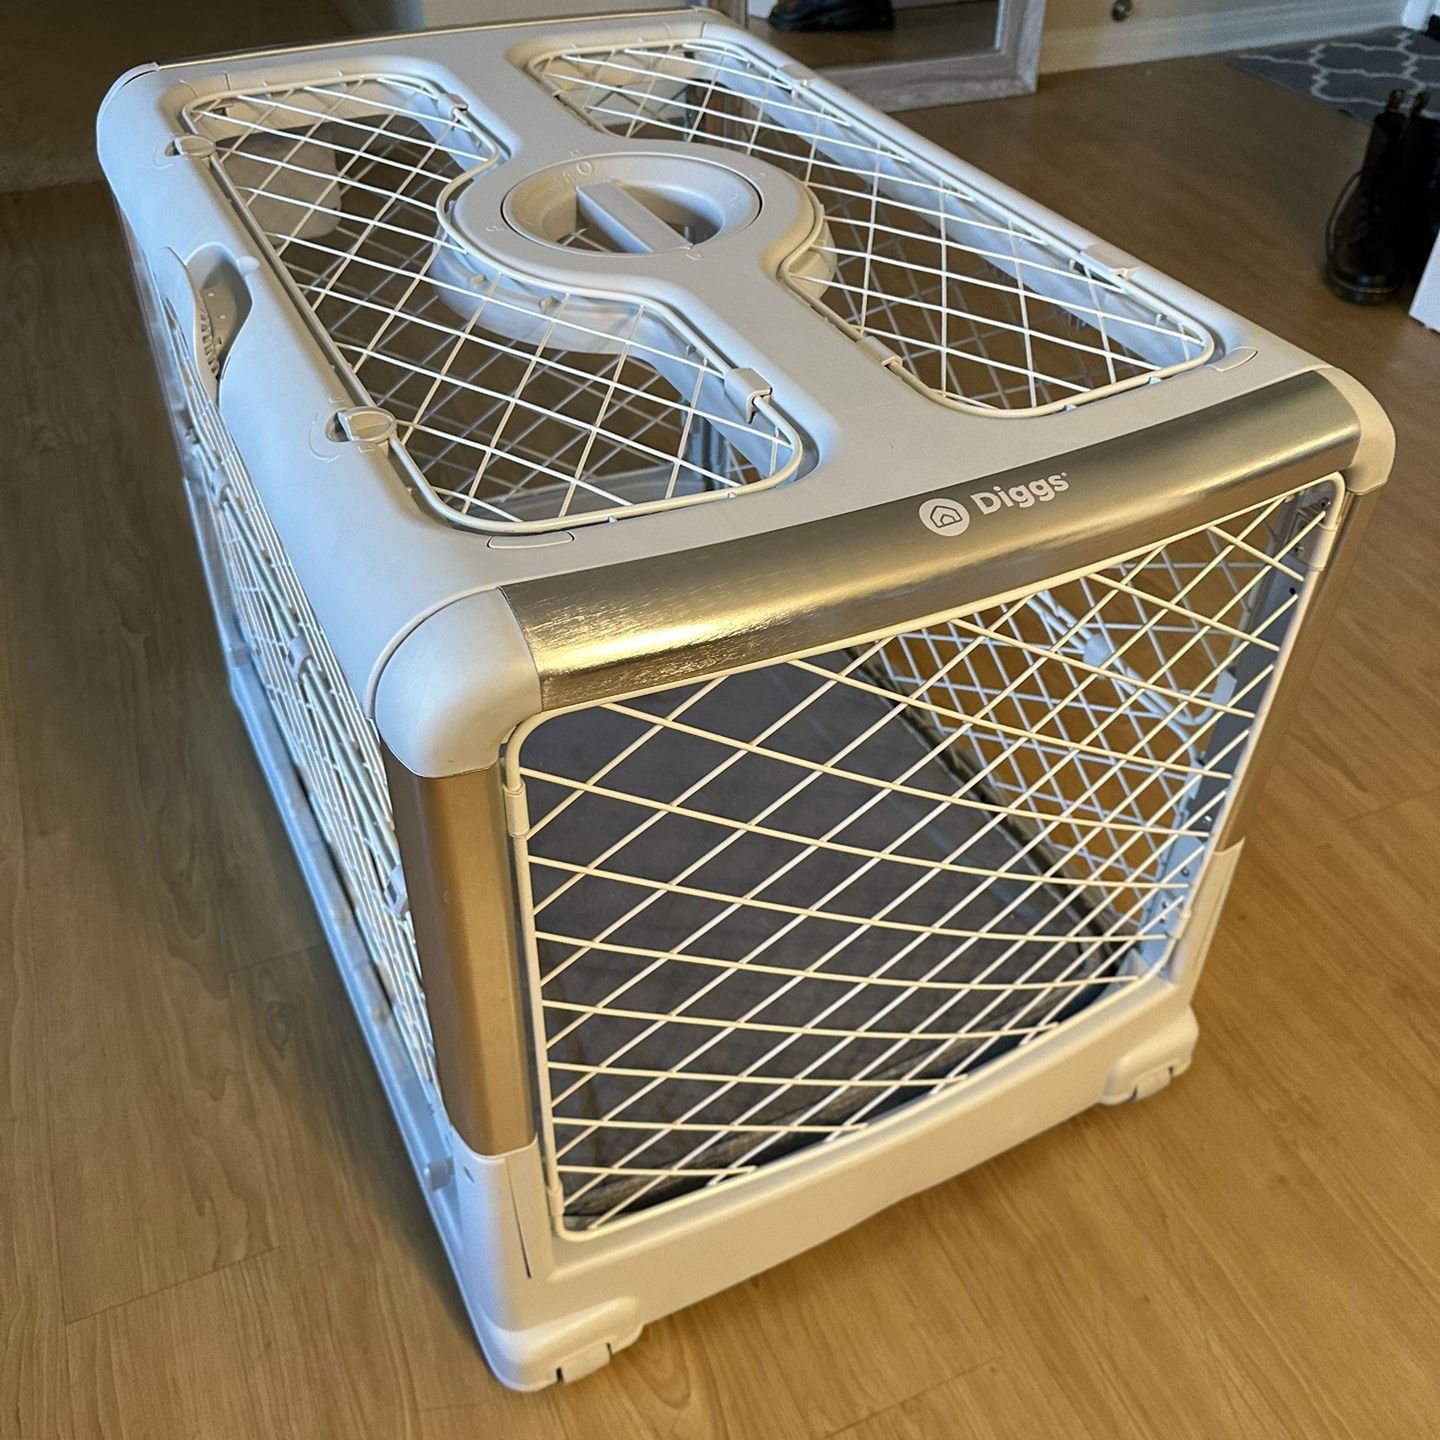 Diggs Revol Collapsible Portable dog crate